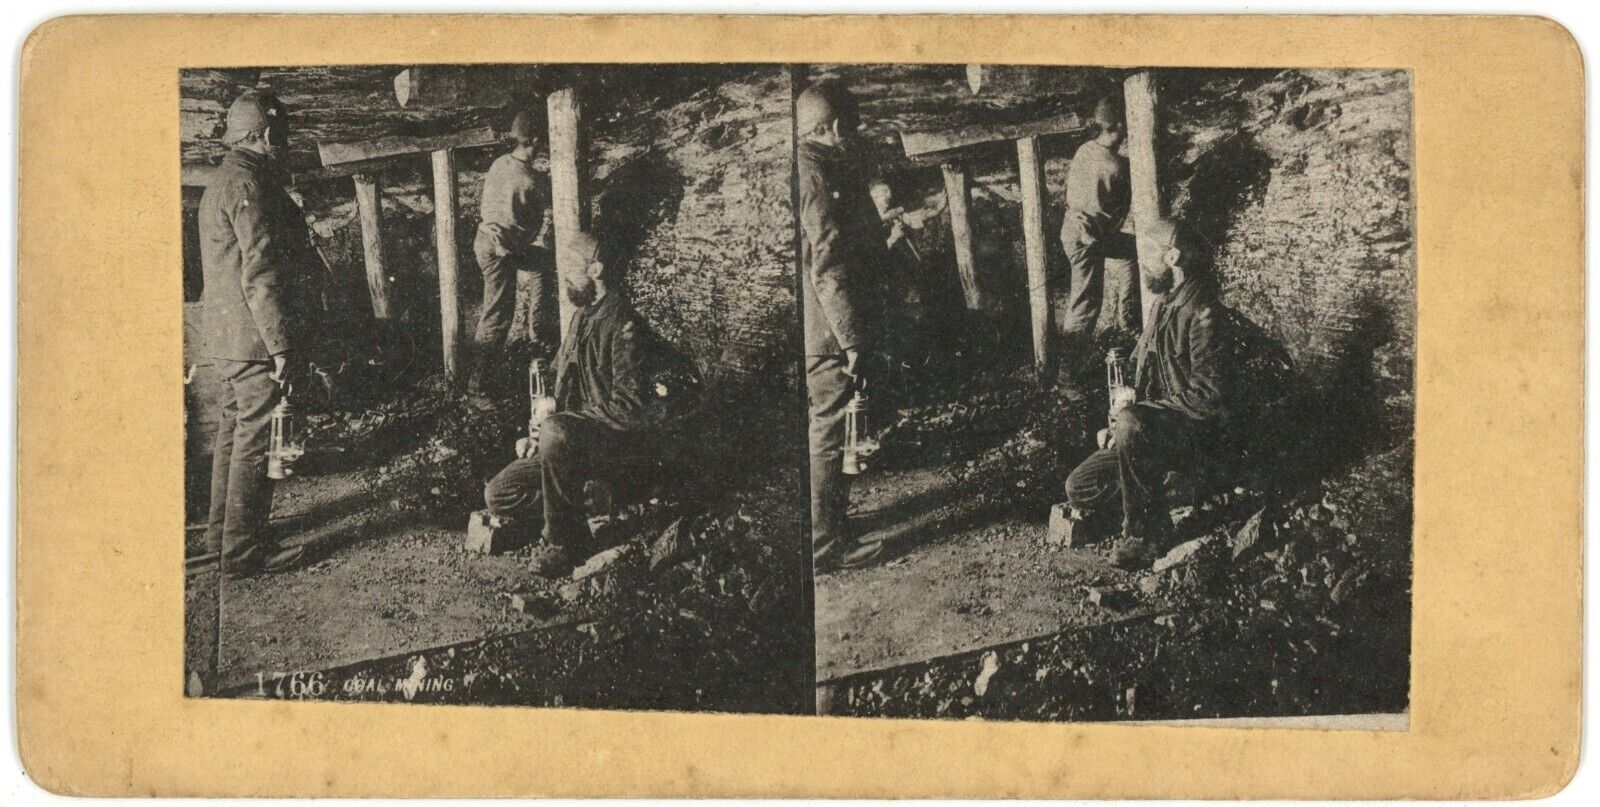 c1900's Very Rare Real Photo Stereoview Card of Miners Working Underground Lamps